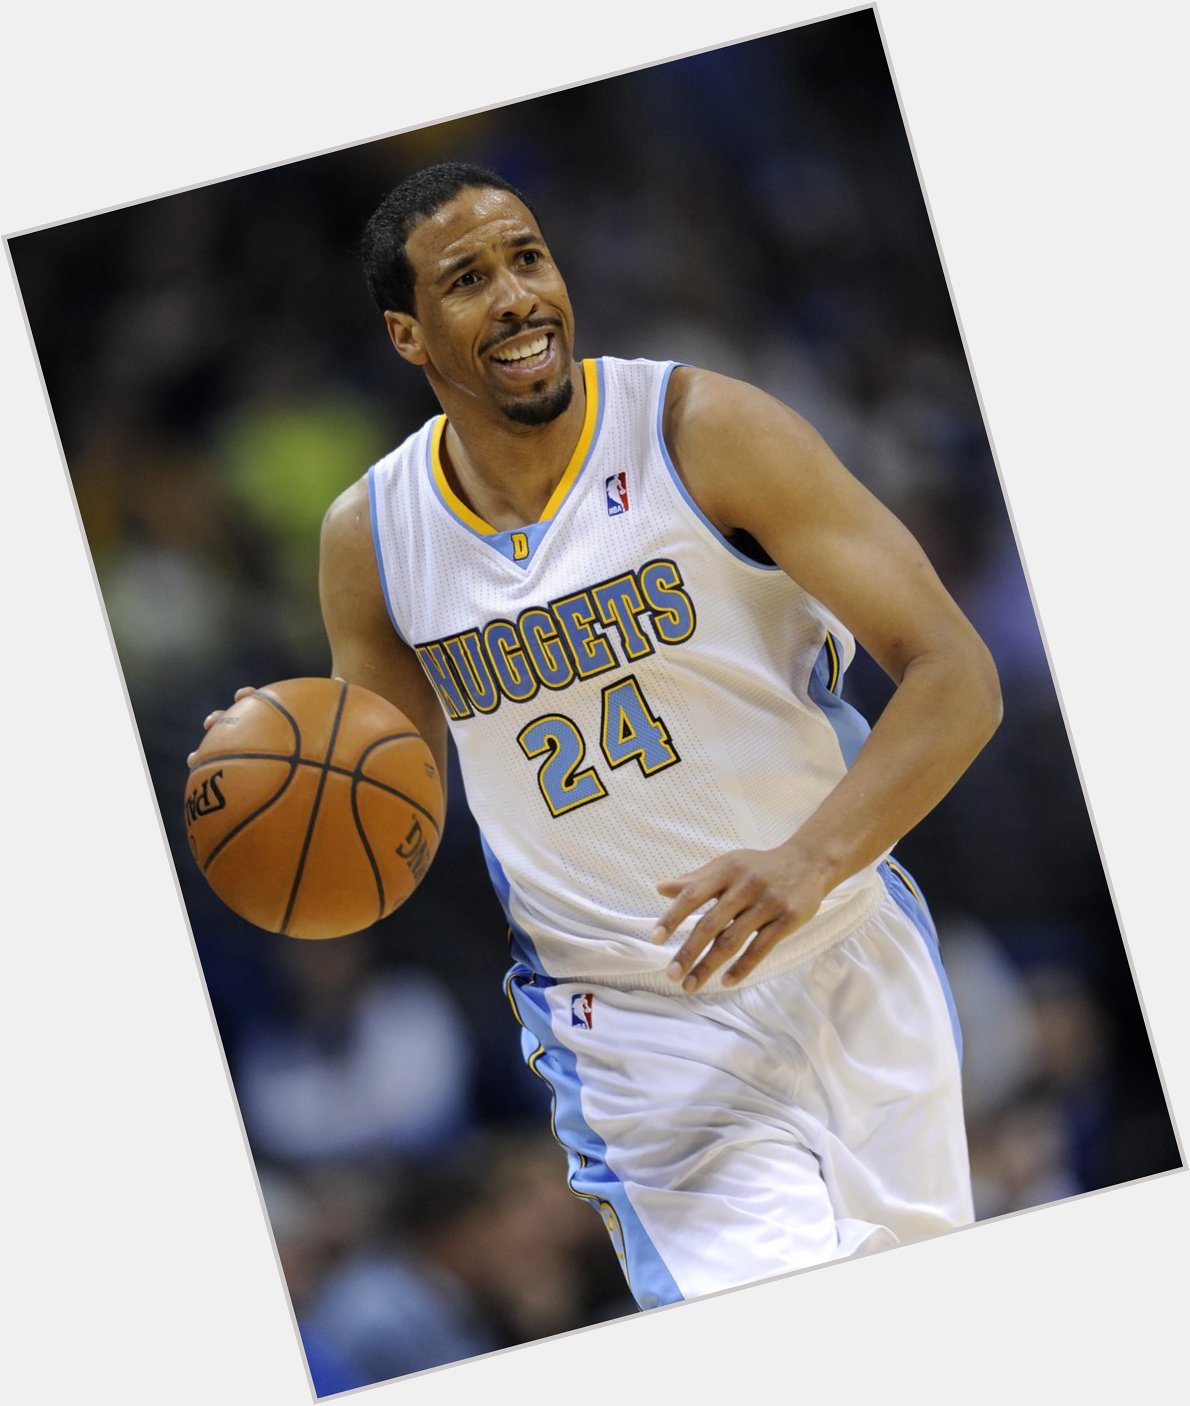 Happy Birthday to Andre Miller and EJ Manuel Jr!  